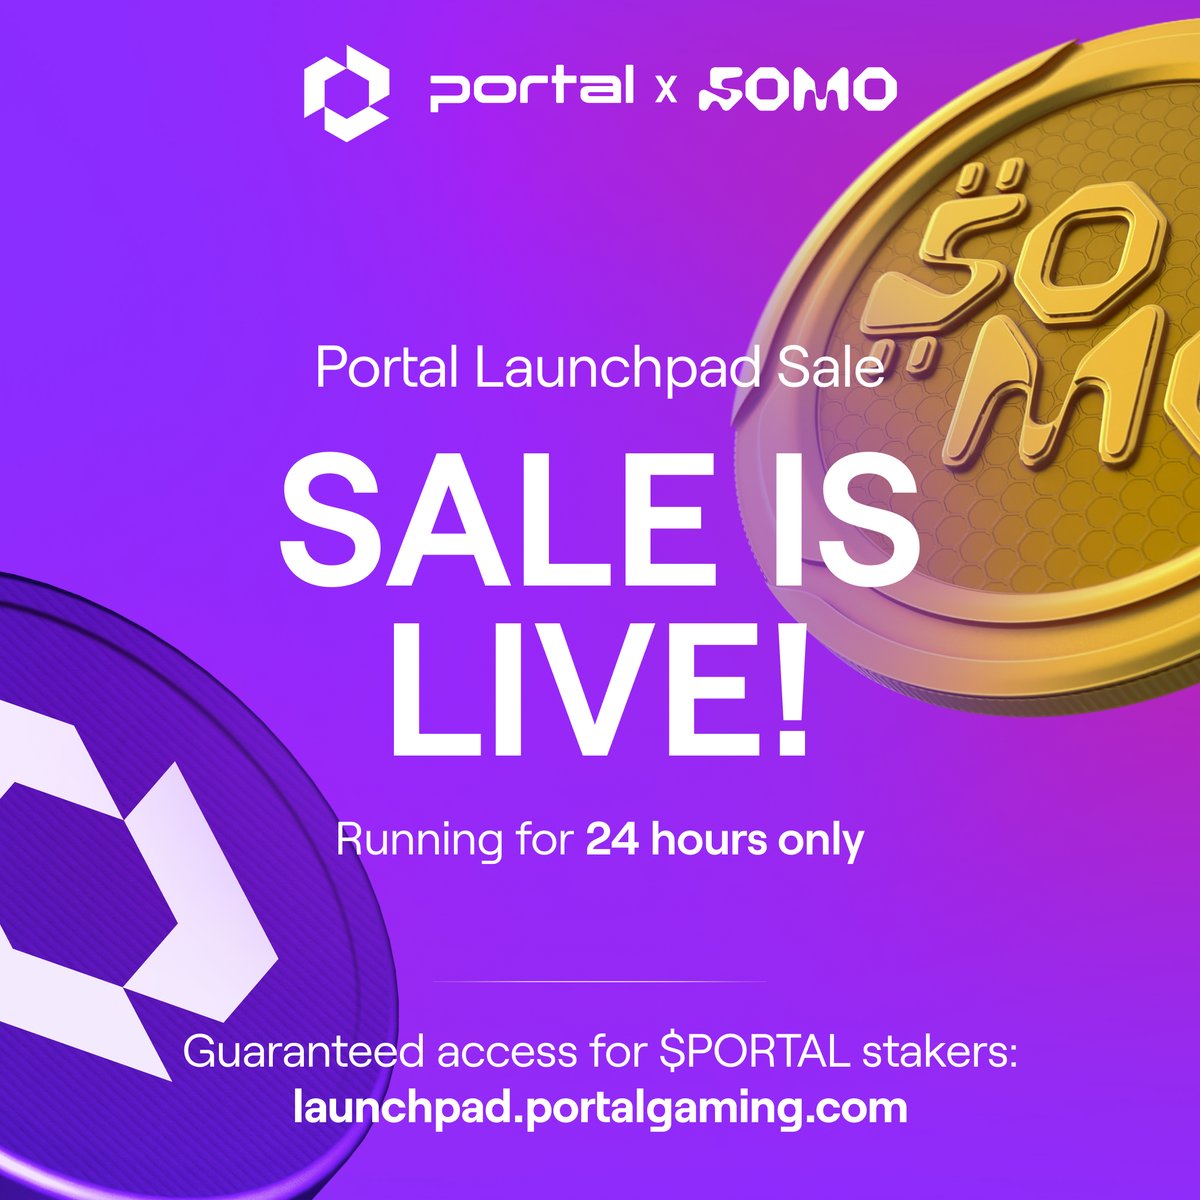 Launchpad sale is live! - $PORTAL stakers have guaranteed access to purchase $SOMO - 24hr sale - Large-ticket purchases exclusive to Launchpad - 5k staking XP needed to participate Site: launchpad.portalgaming.com 1/2